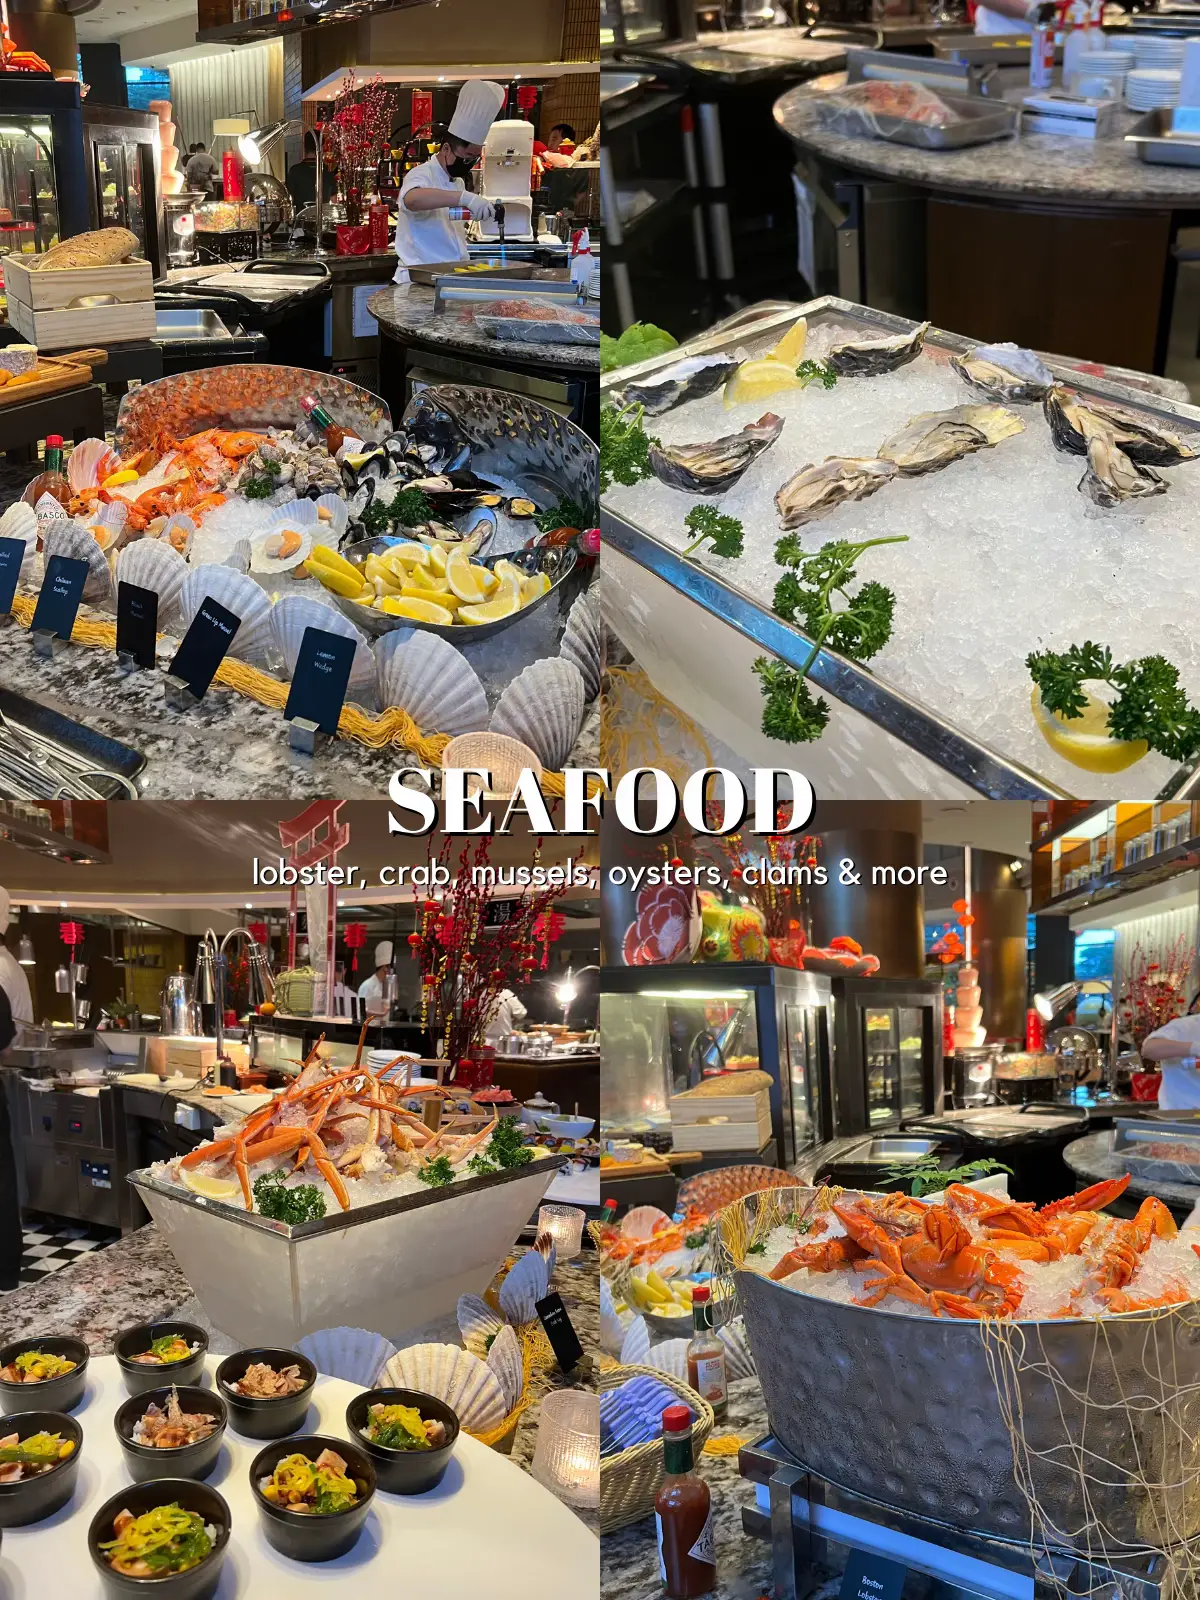 Value-for-money buffet for seafood lovers! 🦀🦞🦐🦪🤤's images(1)